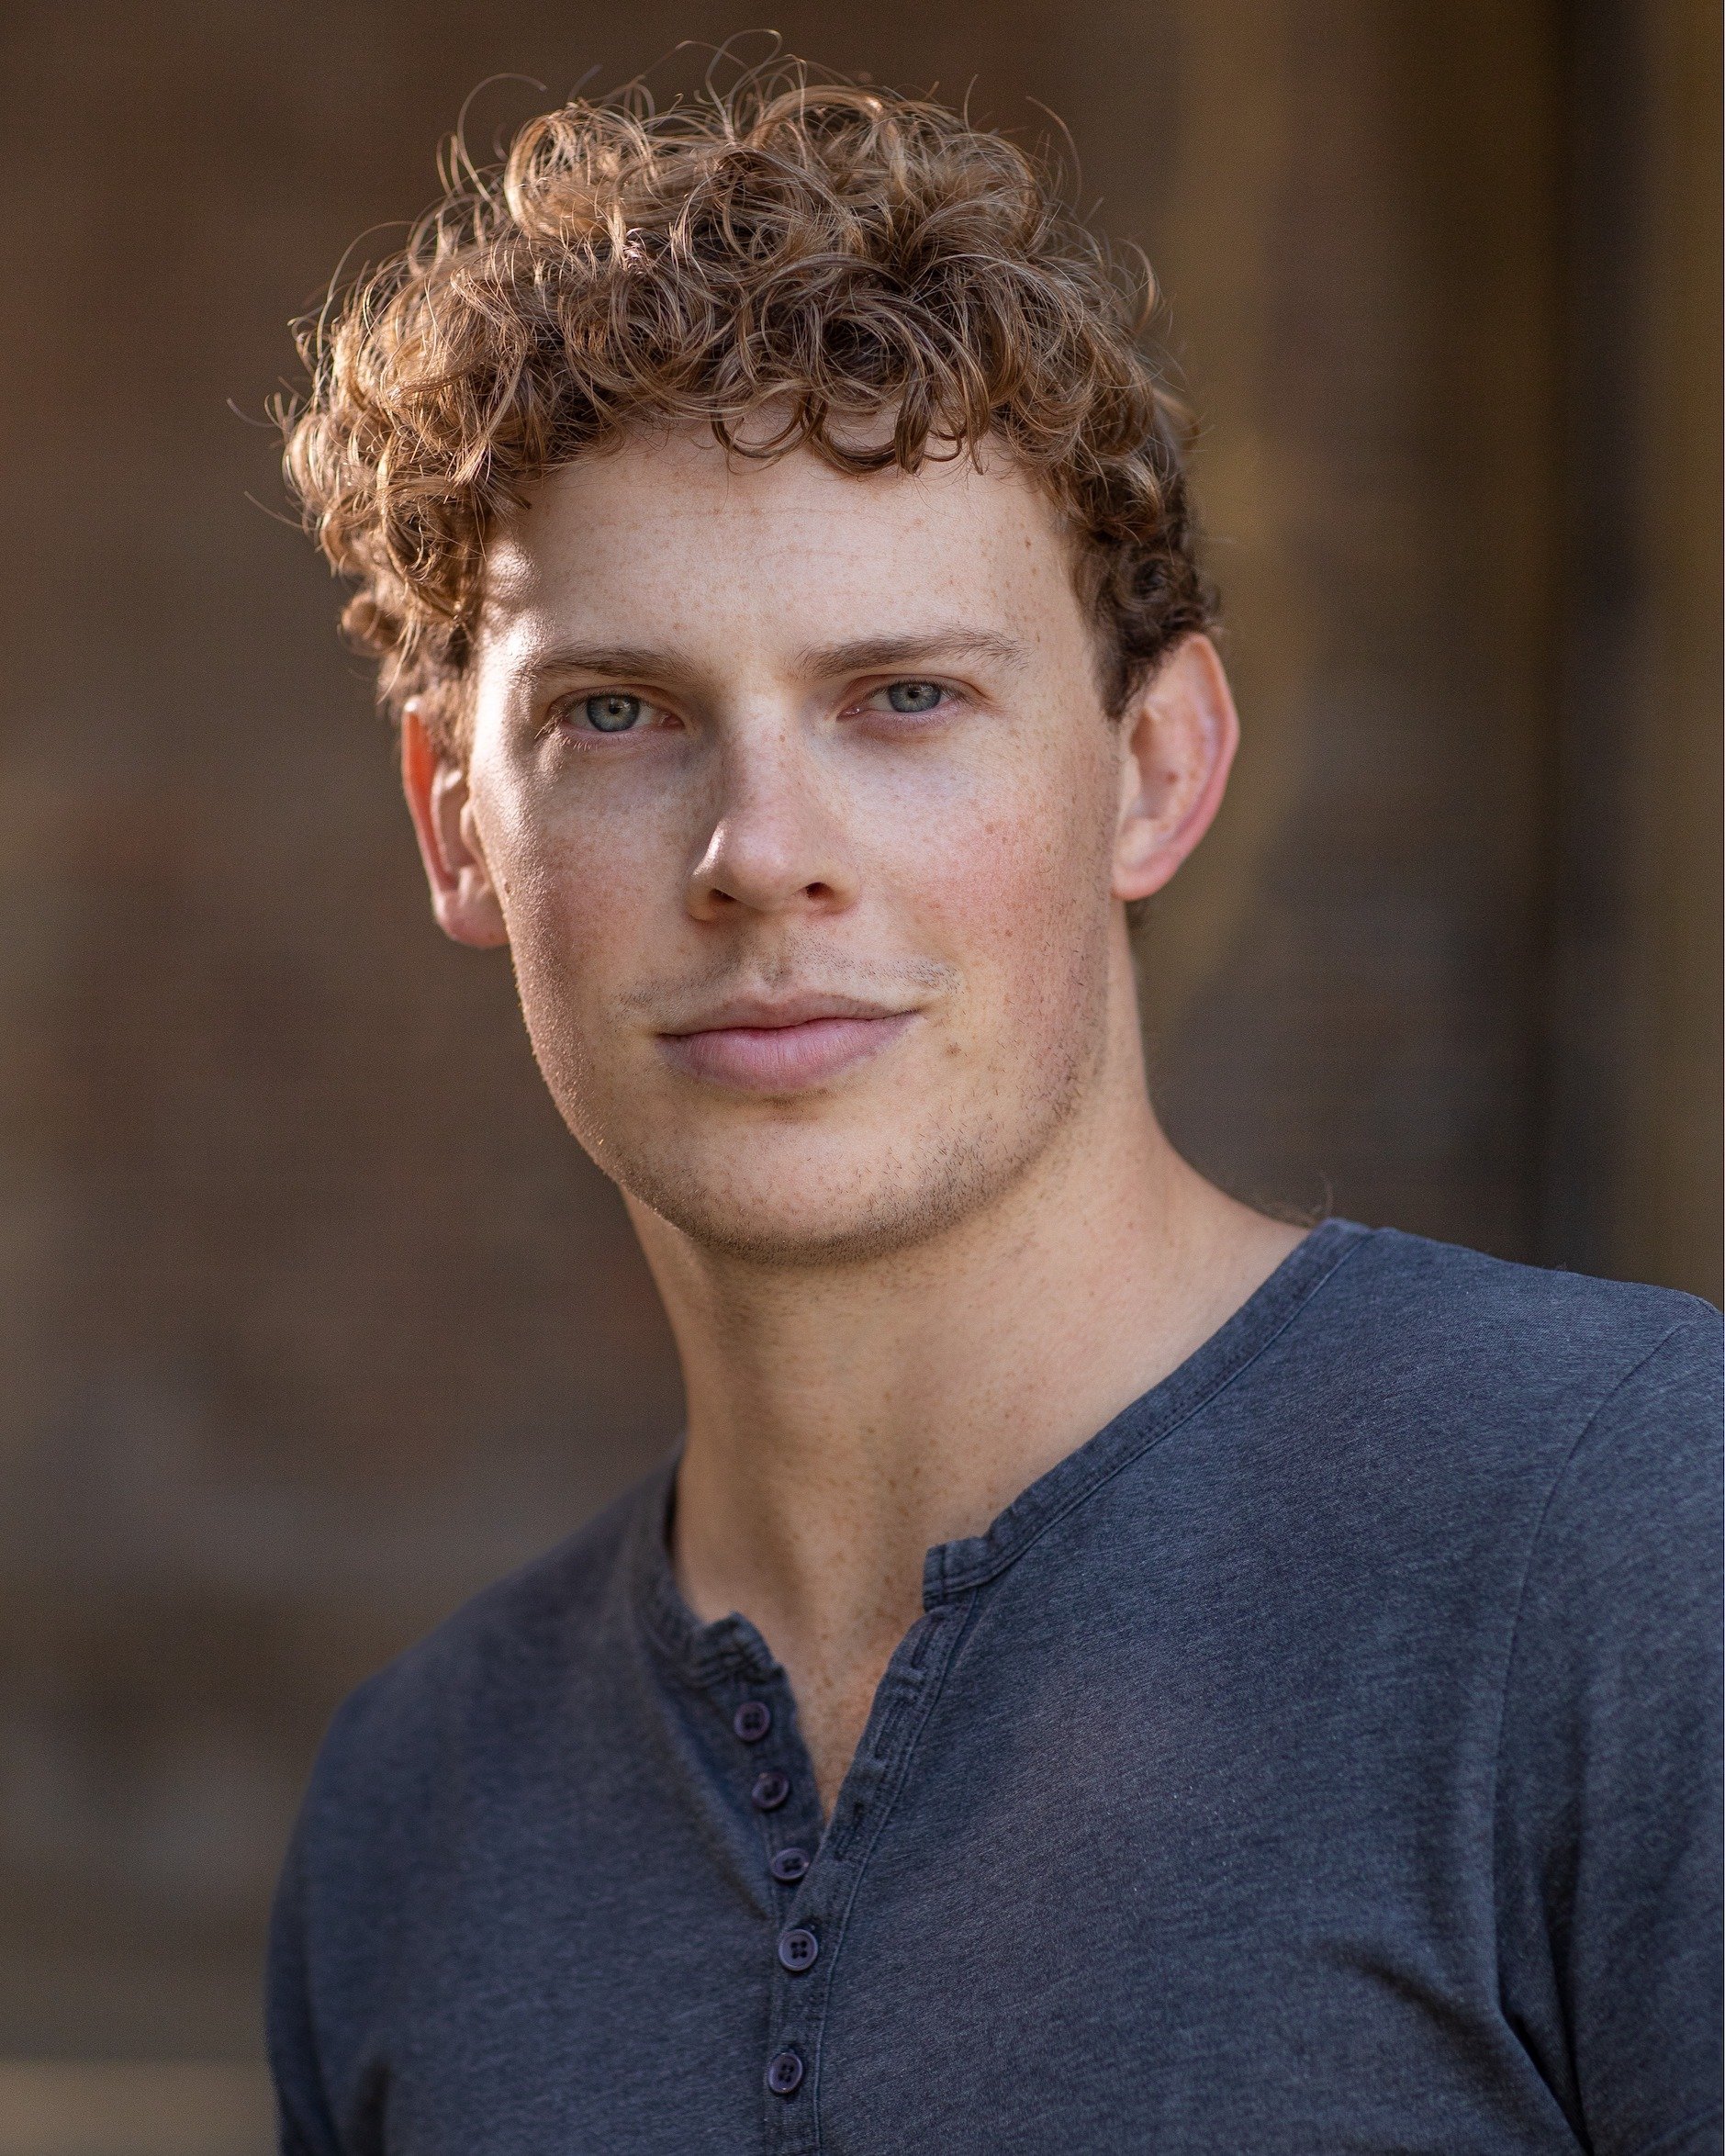 latest news for British actor Steven Pacey